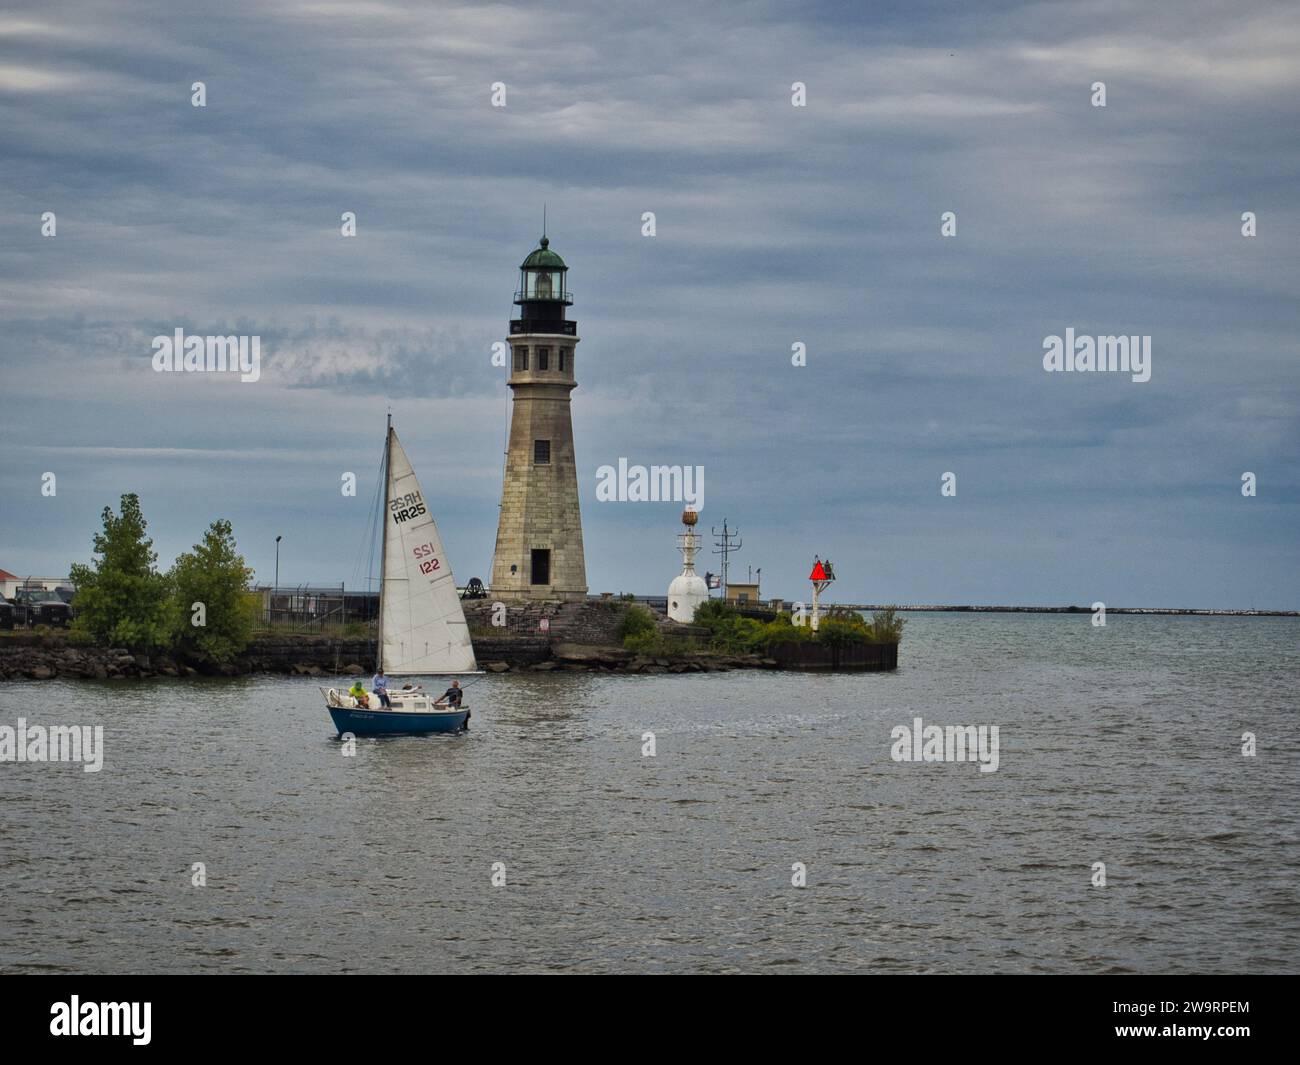 A sailboat passing in front of Buffalo Main Light lighthouse at the Marina on an overcast September day. Stock Photo